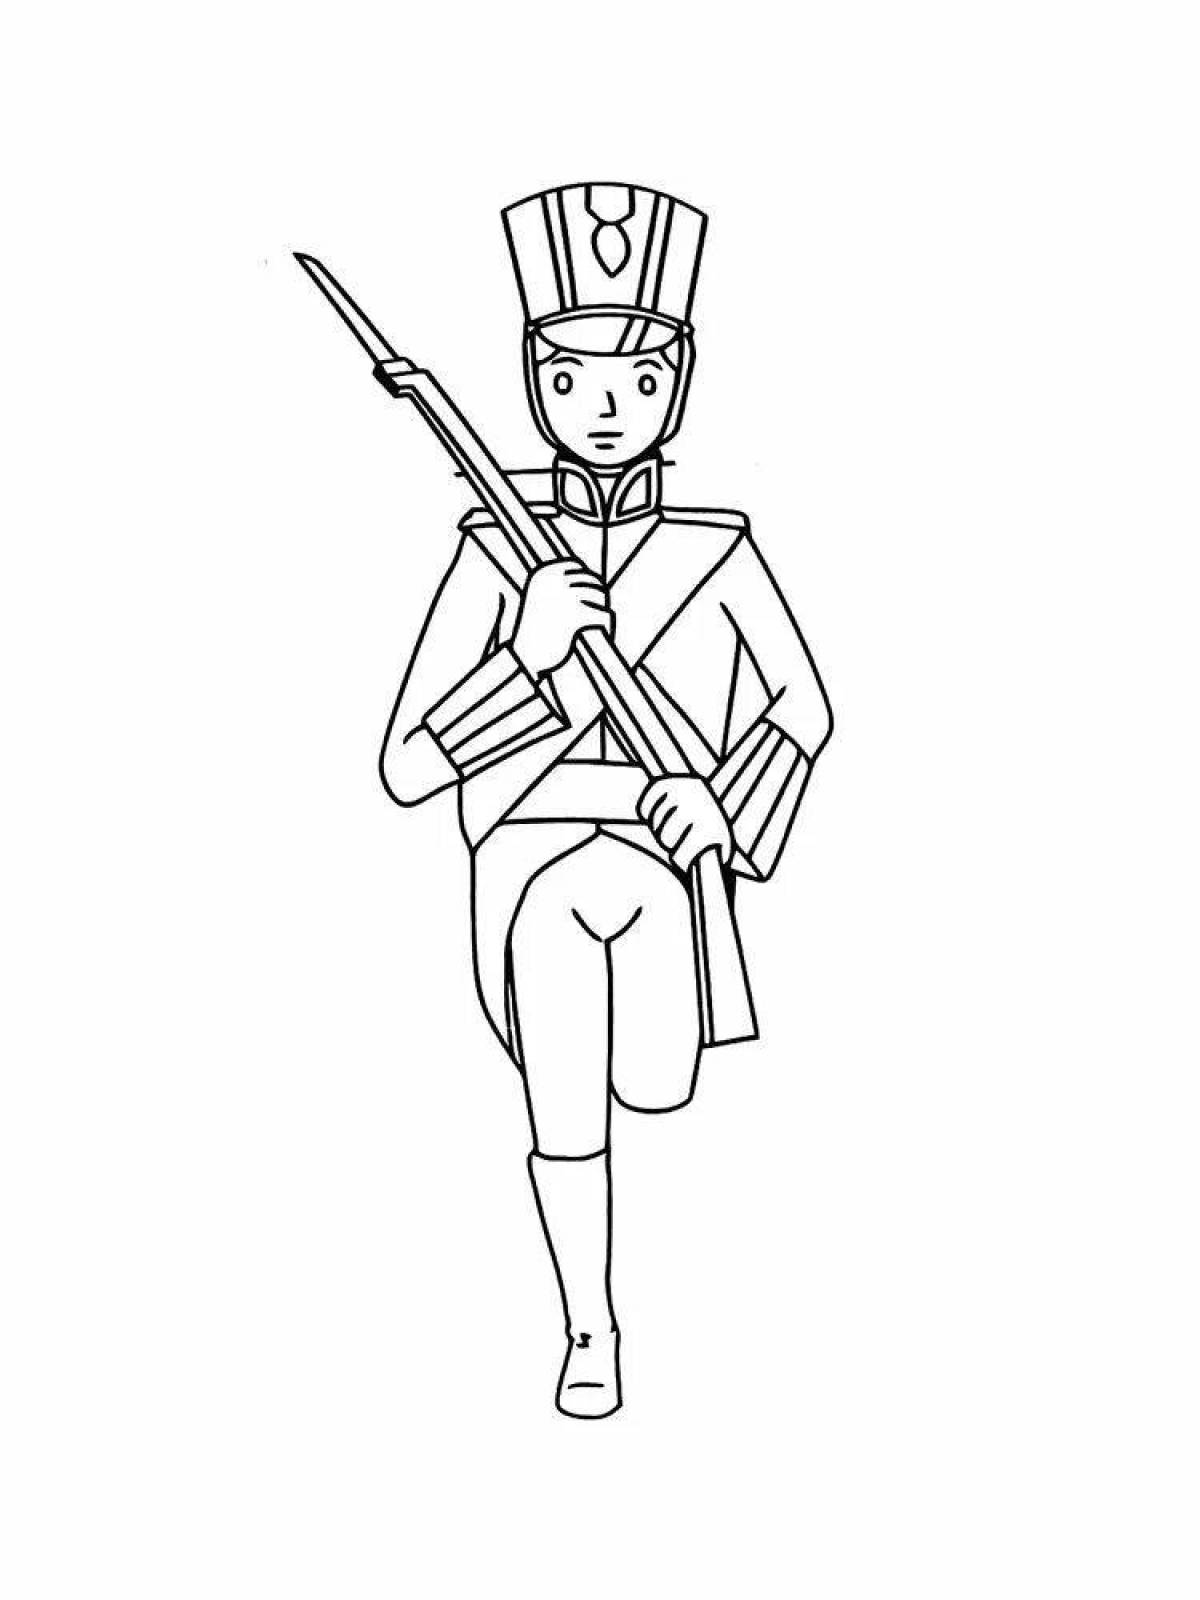 Tin Soldier Exotic Coloring Page